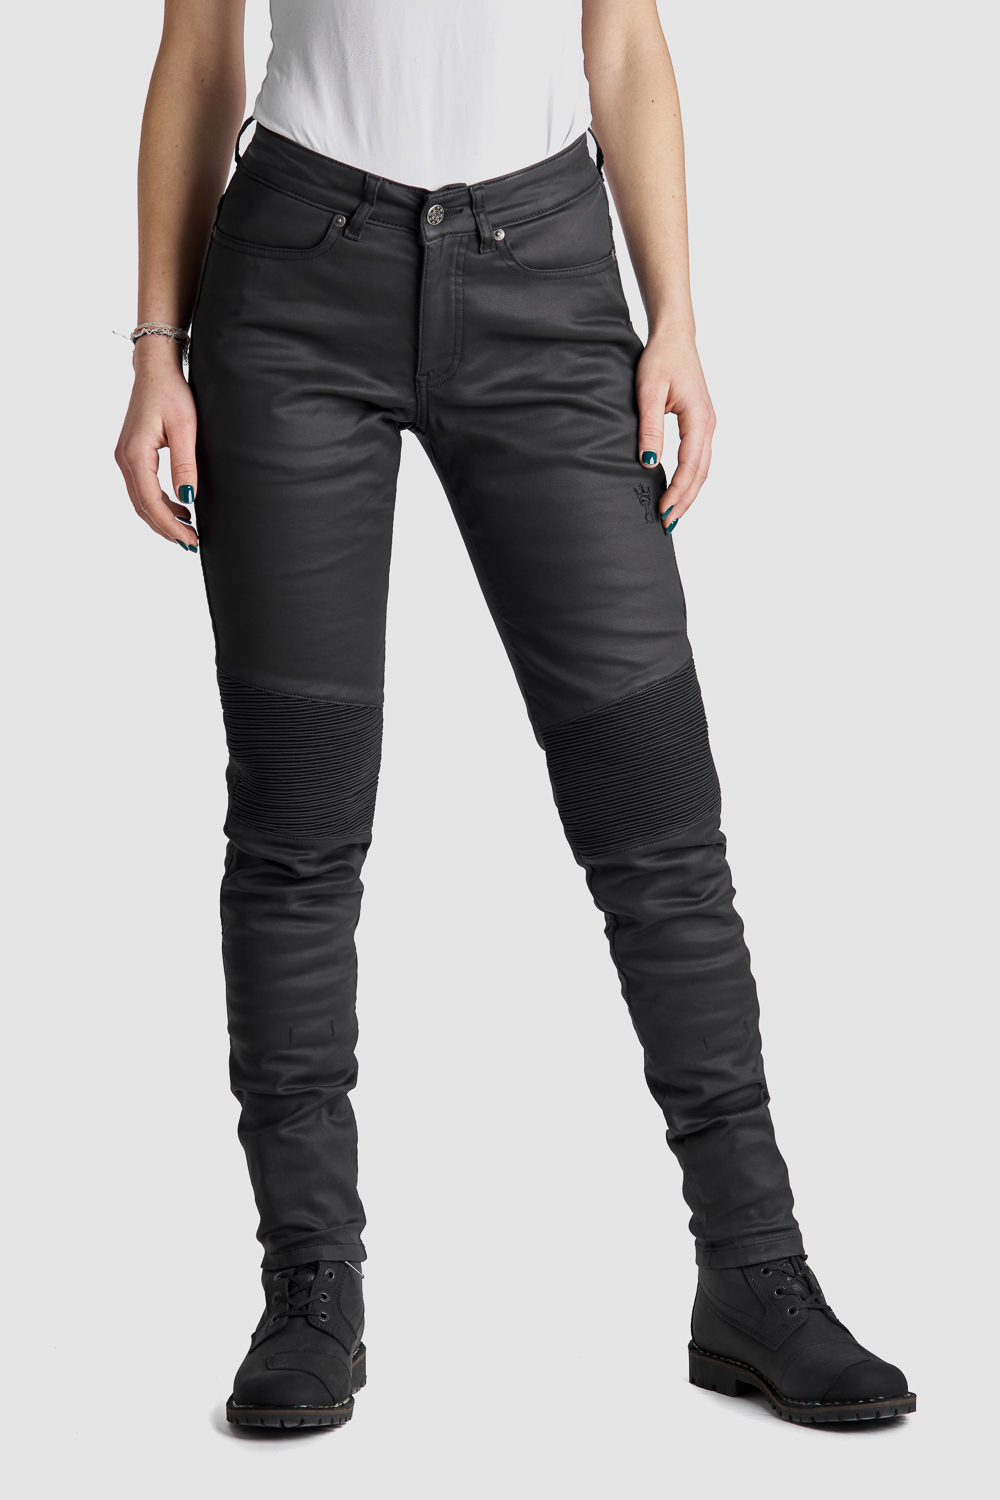 Ladies Motorcycle Leather Trousers | FREE UK DELIVERY & RETURNS | JTS Biker  Clothing - JTS Biker Clothing